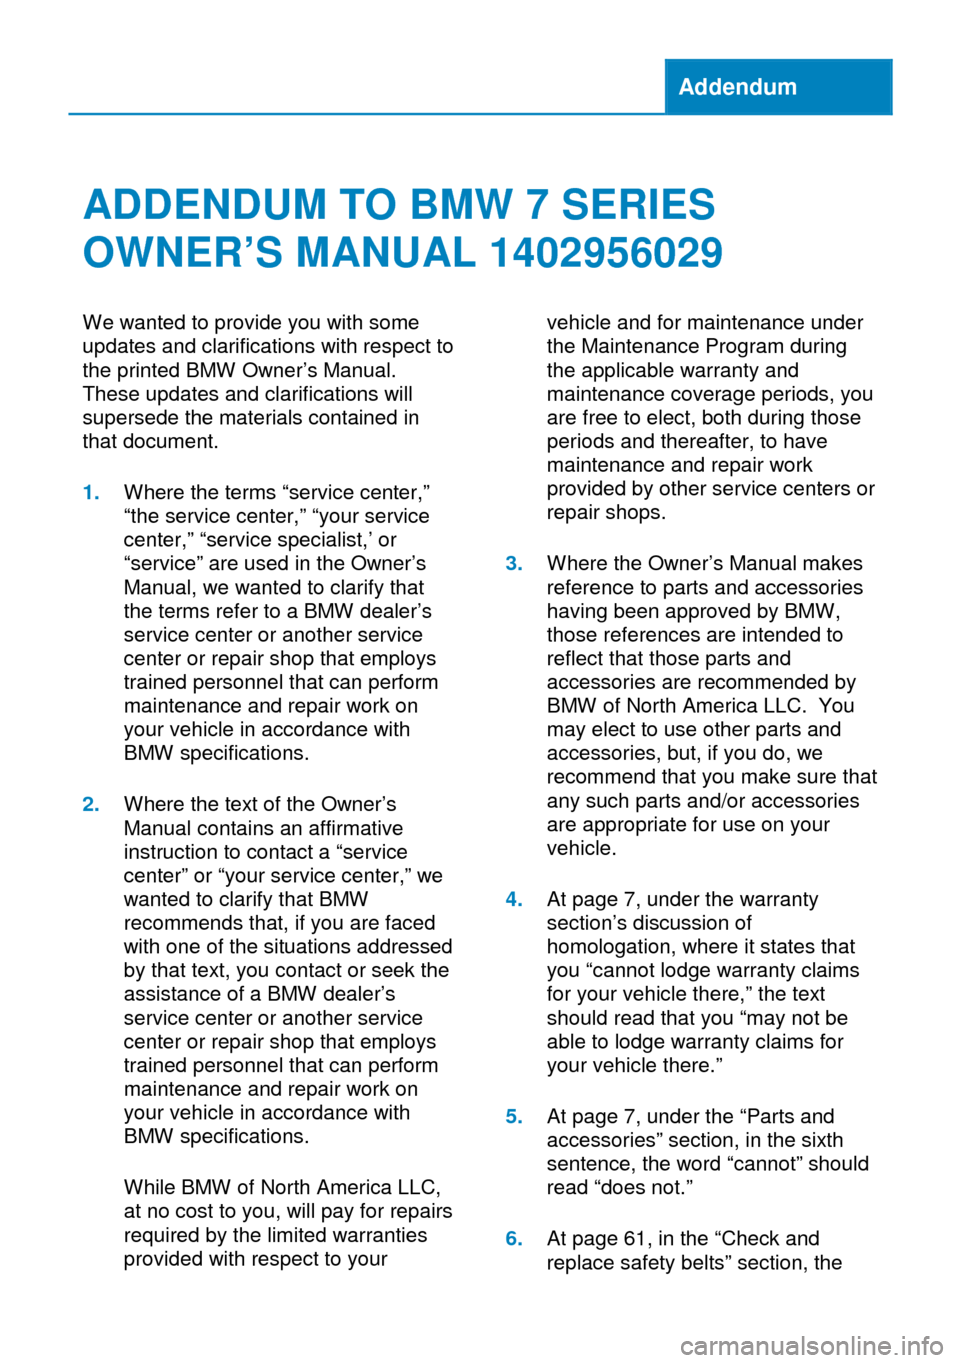 BMW 7 SERIES 2014 F01 Owners Manual Addendum
ADDENDUM TO BMW 7 SERIES
OWNER’S MANUAL 1402956029
We wanted to provide you with some
updates and clarifications with respect to
the printed BMW Owner’s Manual.
These updates and clarific